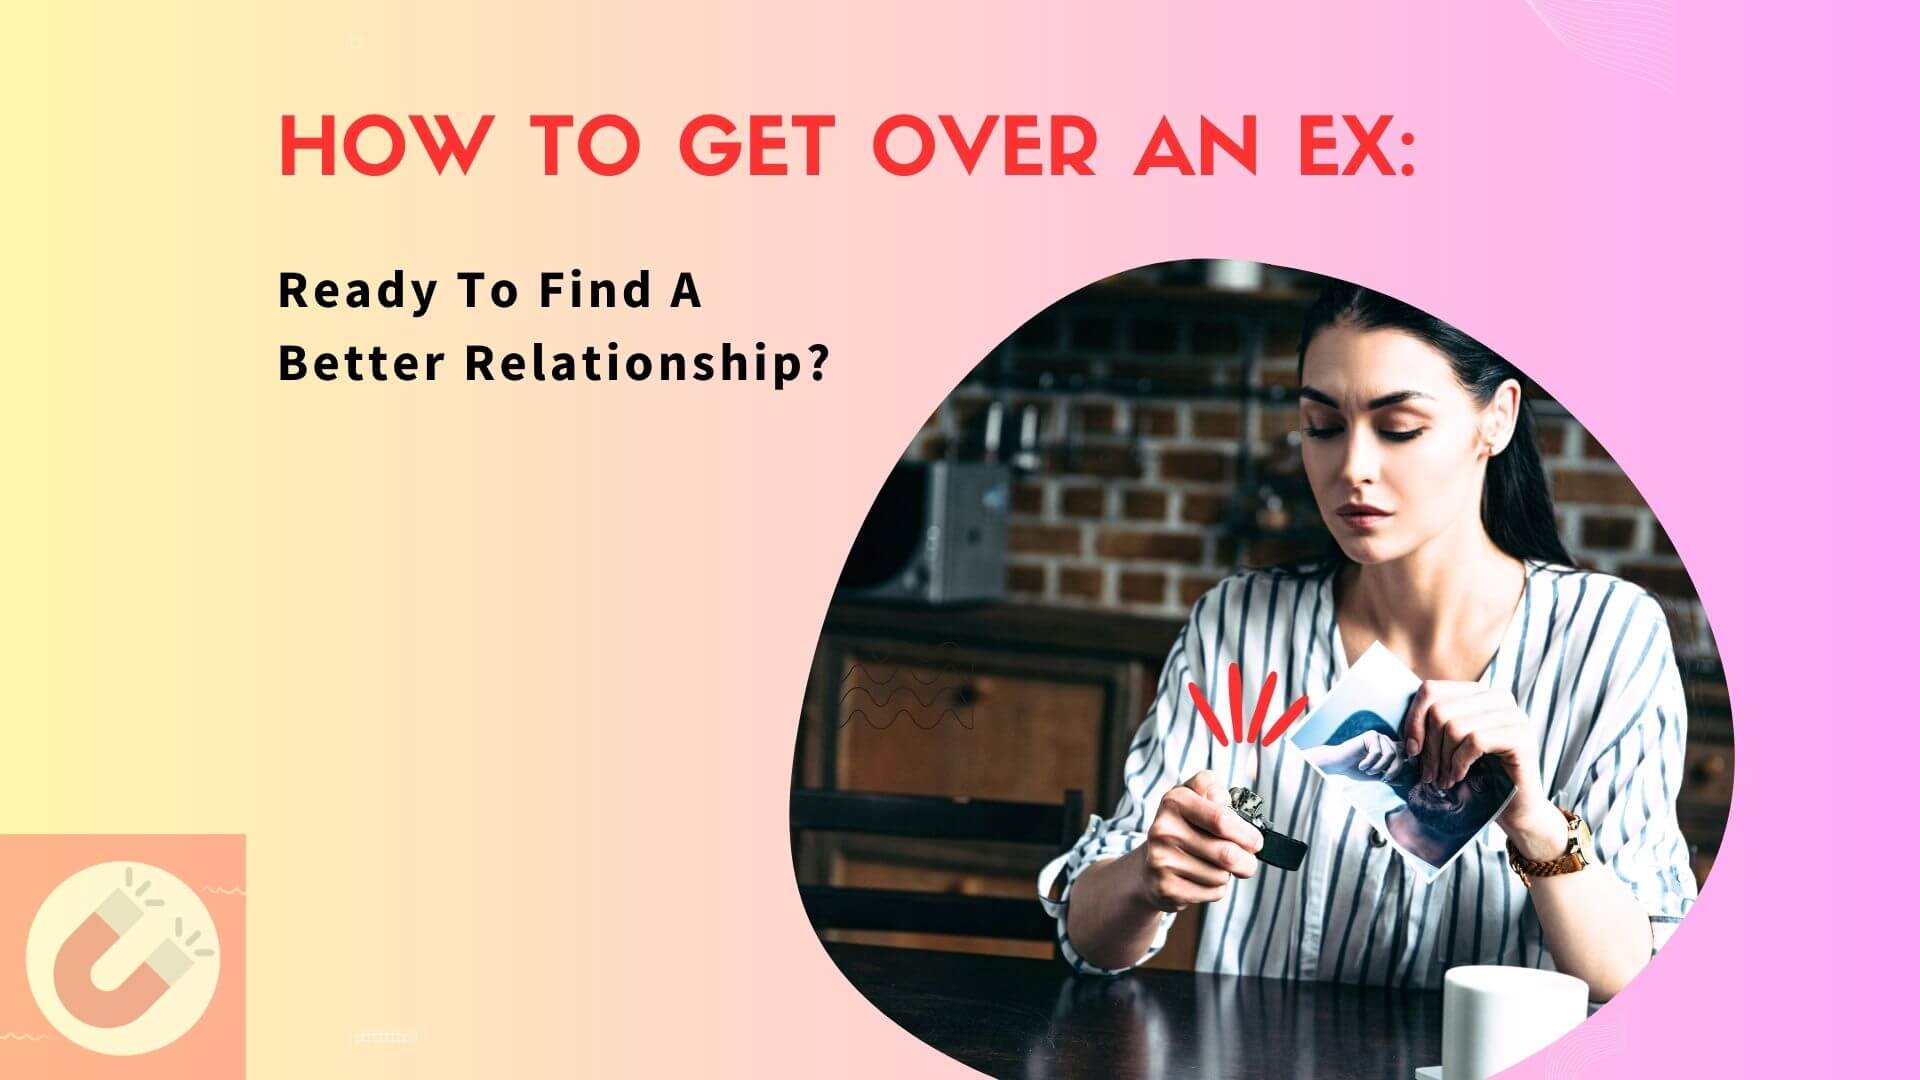 How to get over an ex